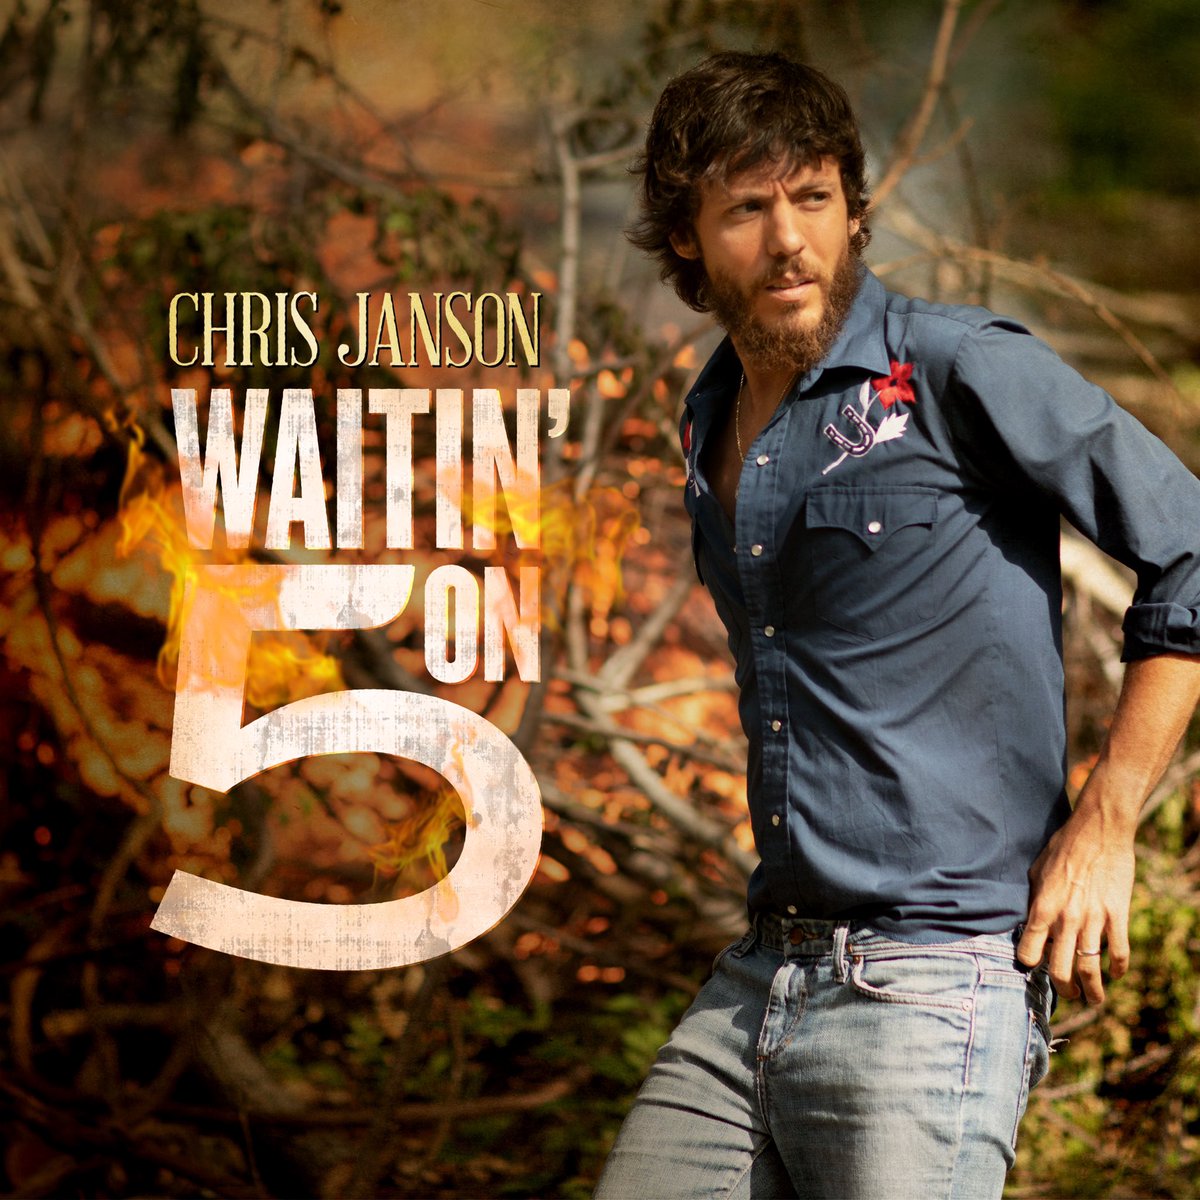 My next single is “Waitin’ on 5” and I’m really excited about it! This song is an anthem for everybody out there working and waitin on 5 to start a party. #waitinon5 wmna.sh/waitinon5